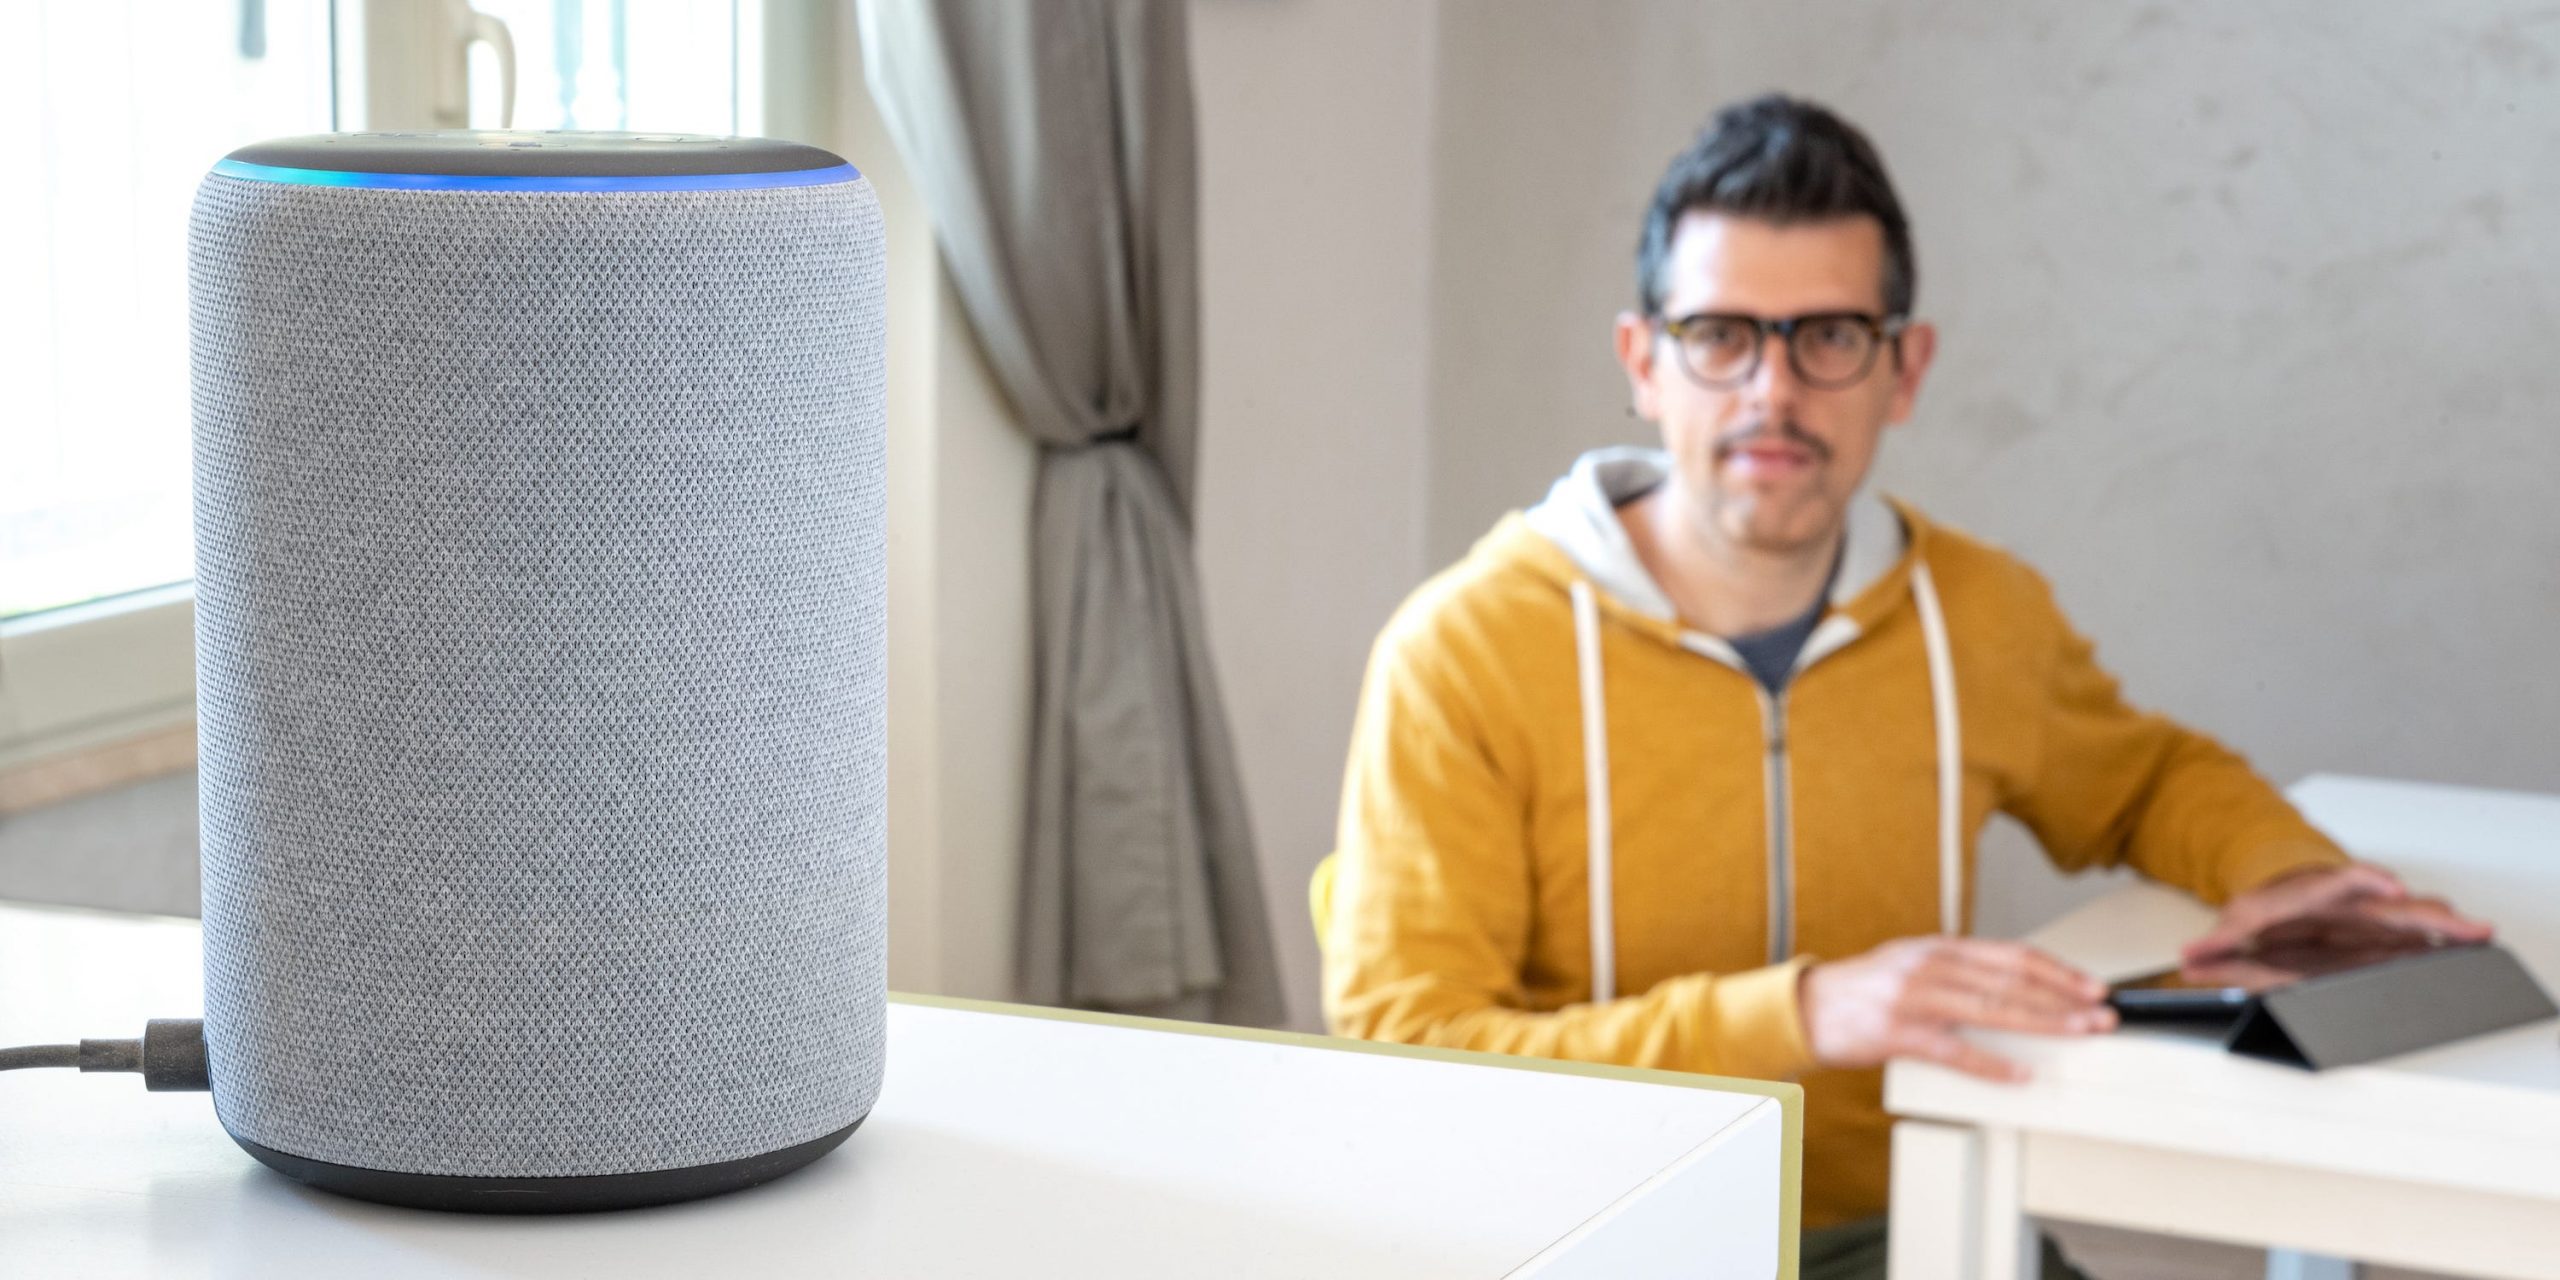 An Amazon Echo sitting on a table, with a man looking at it